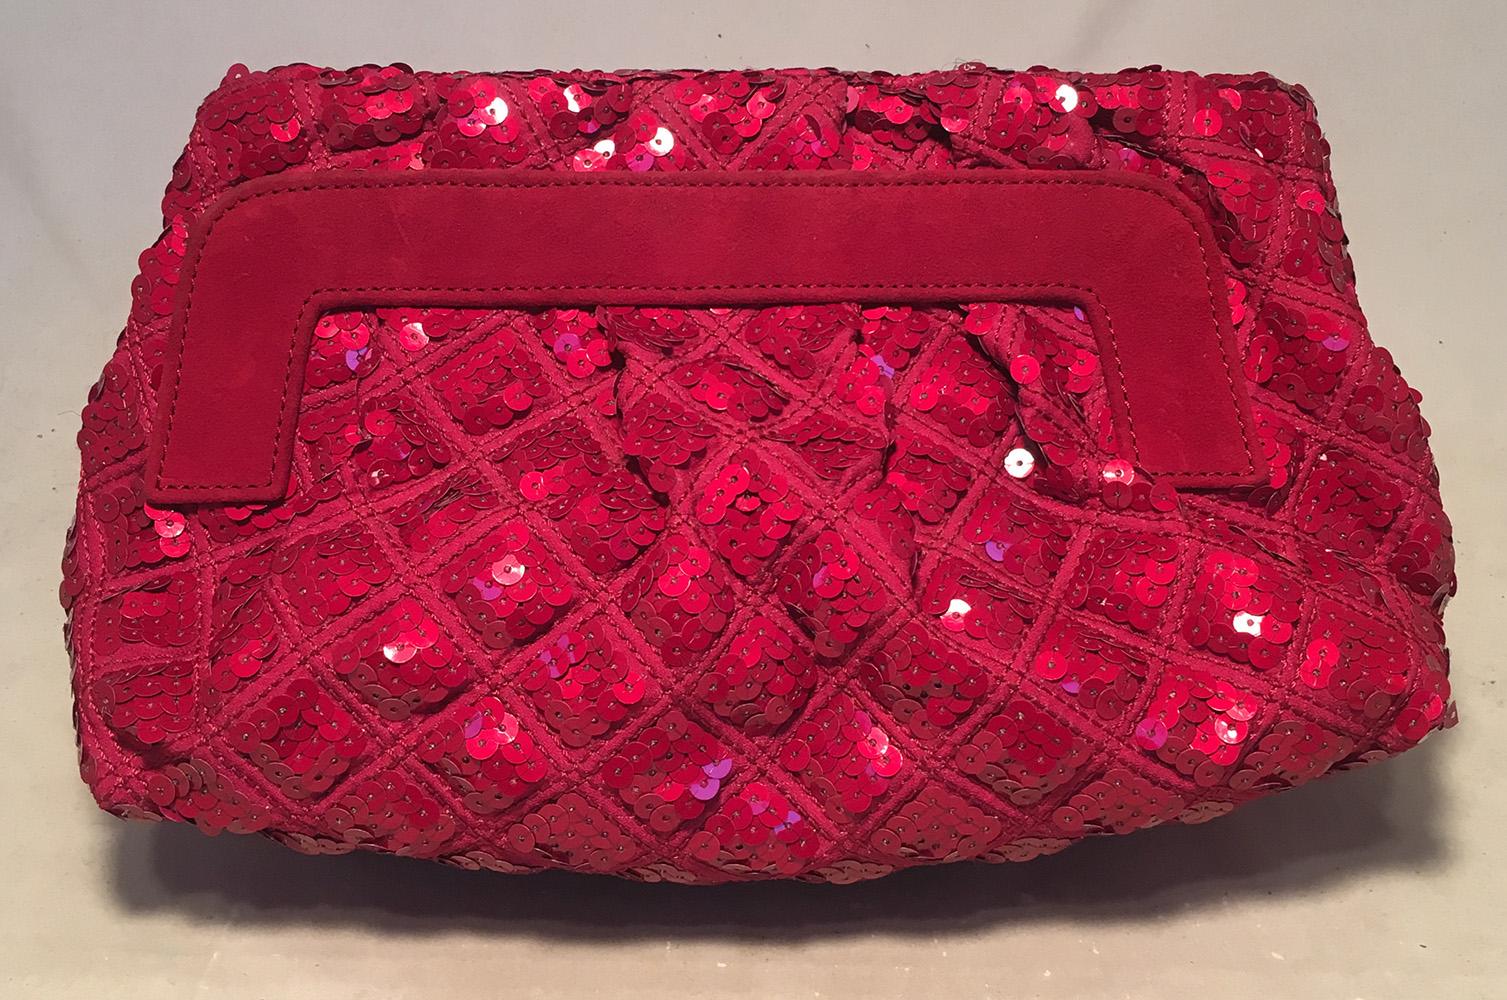 Marc Jacobs Pink Sequin Catherine Clutch Shoulder Bag in excellent condition. Dark pink quilted sequin exterior trimmed with matching pink suede and and gunmetal hardware. Small gunmetal frog detail along front side with pink sequin eyes. Top hinge